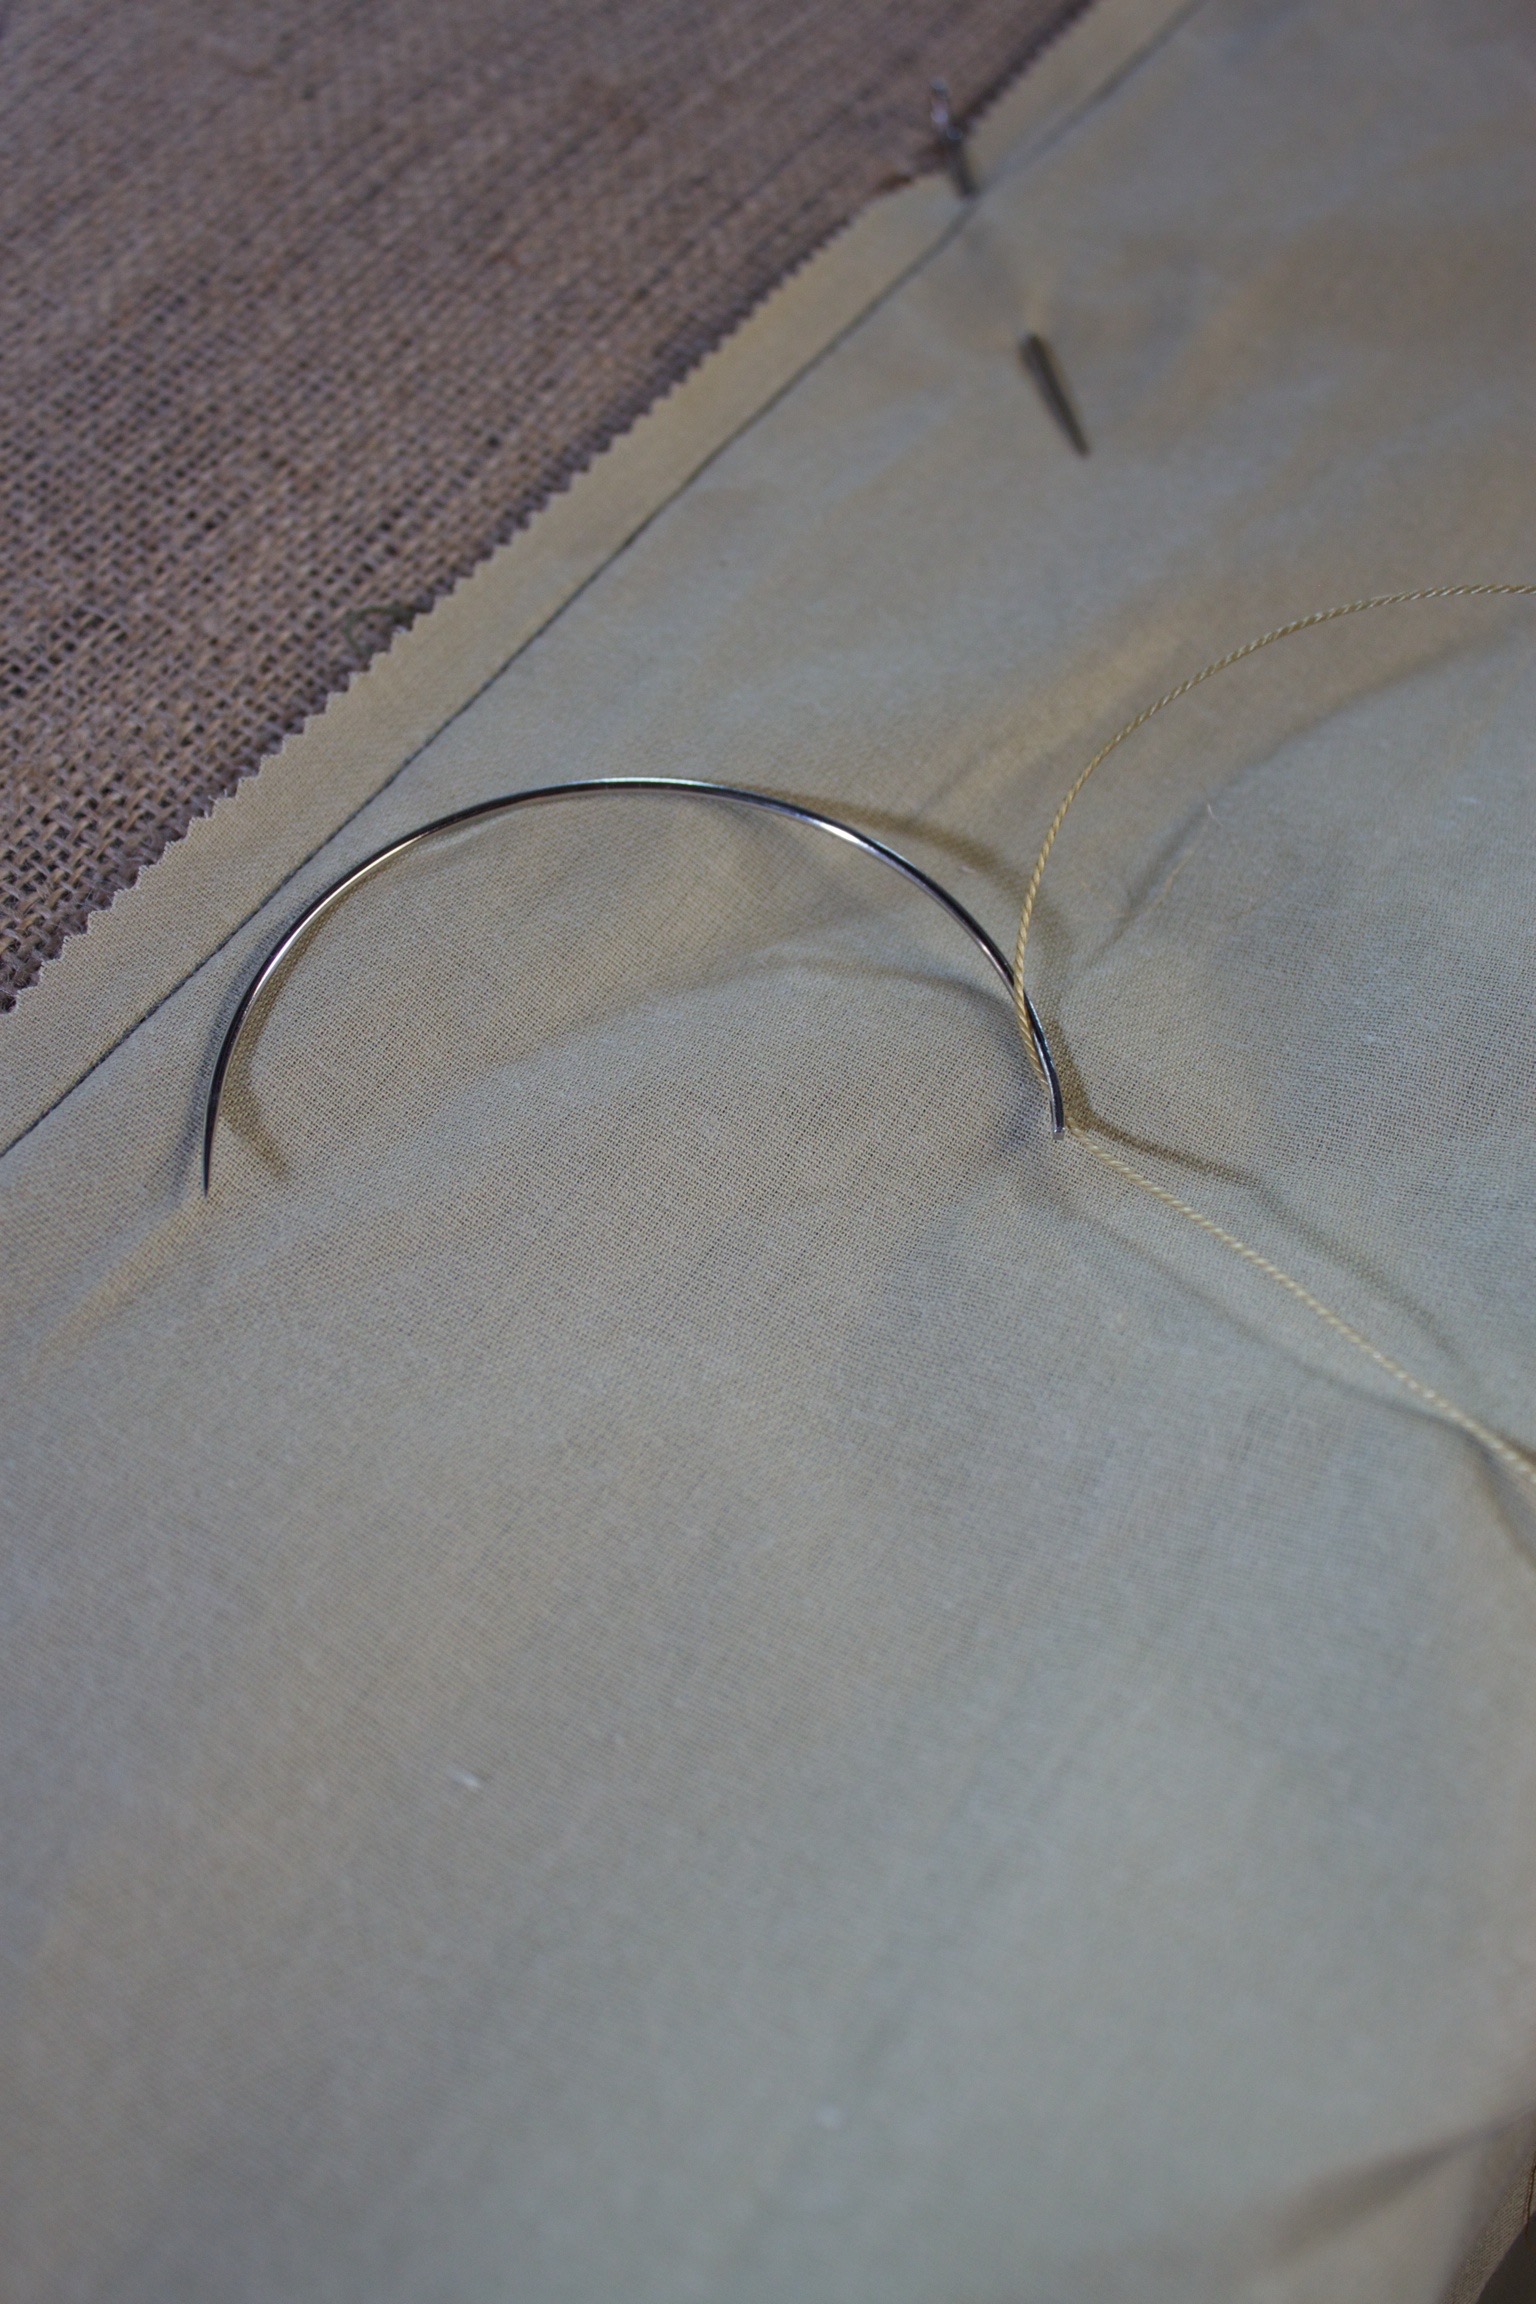 6" Curved Needle for Upholstery